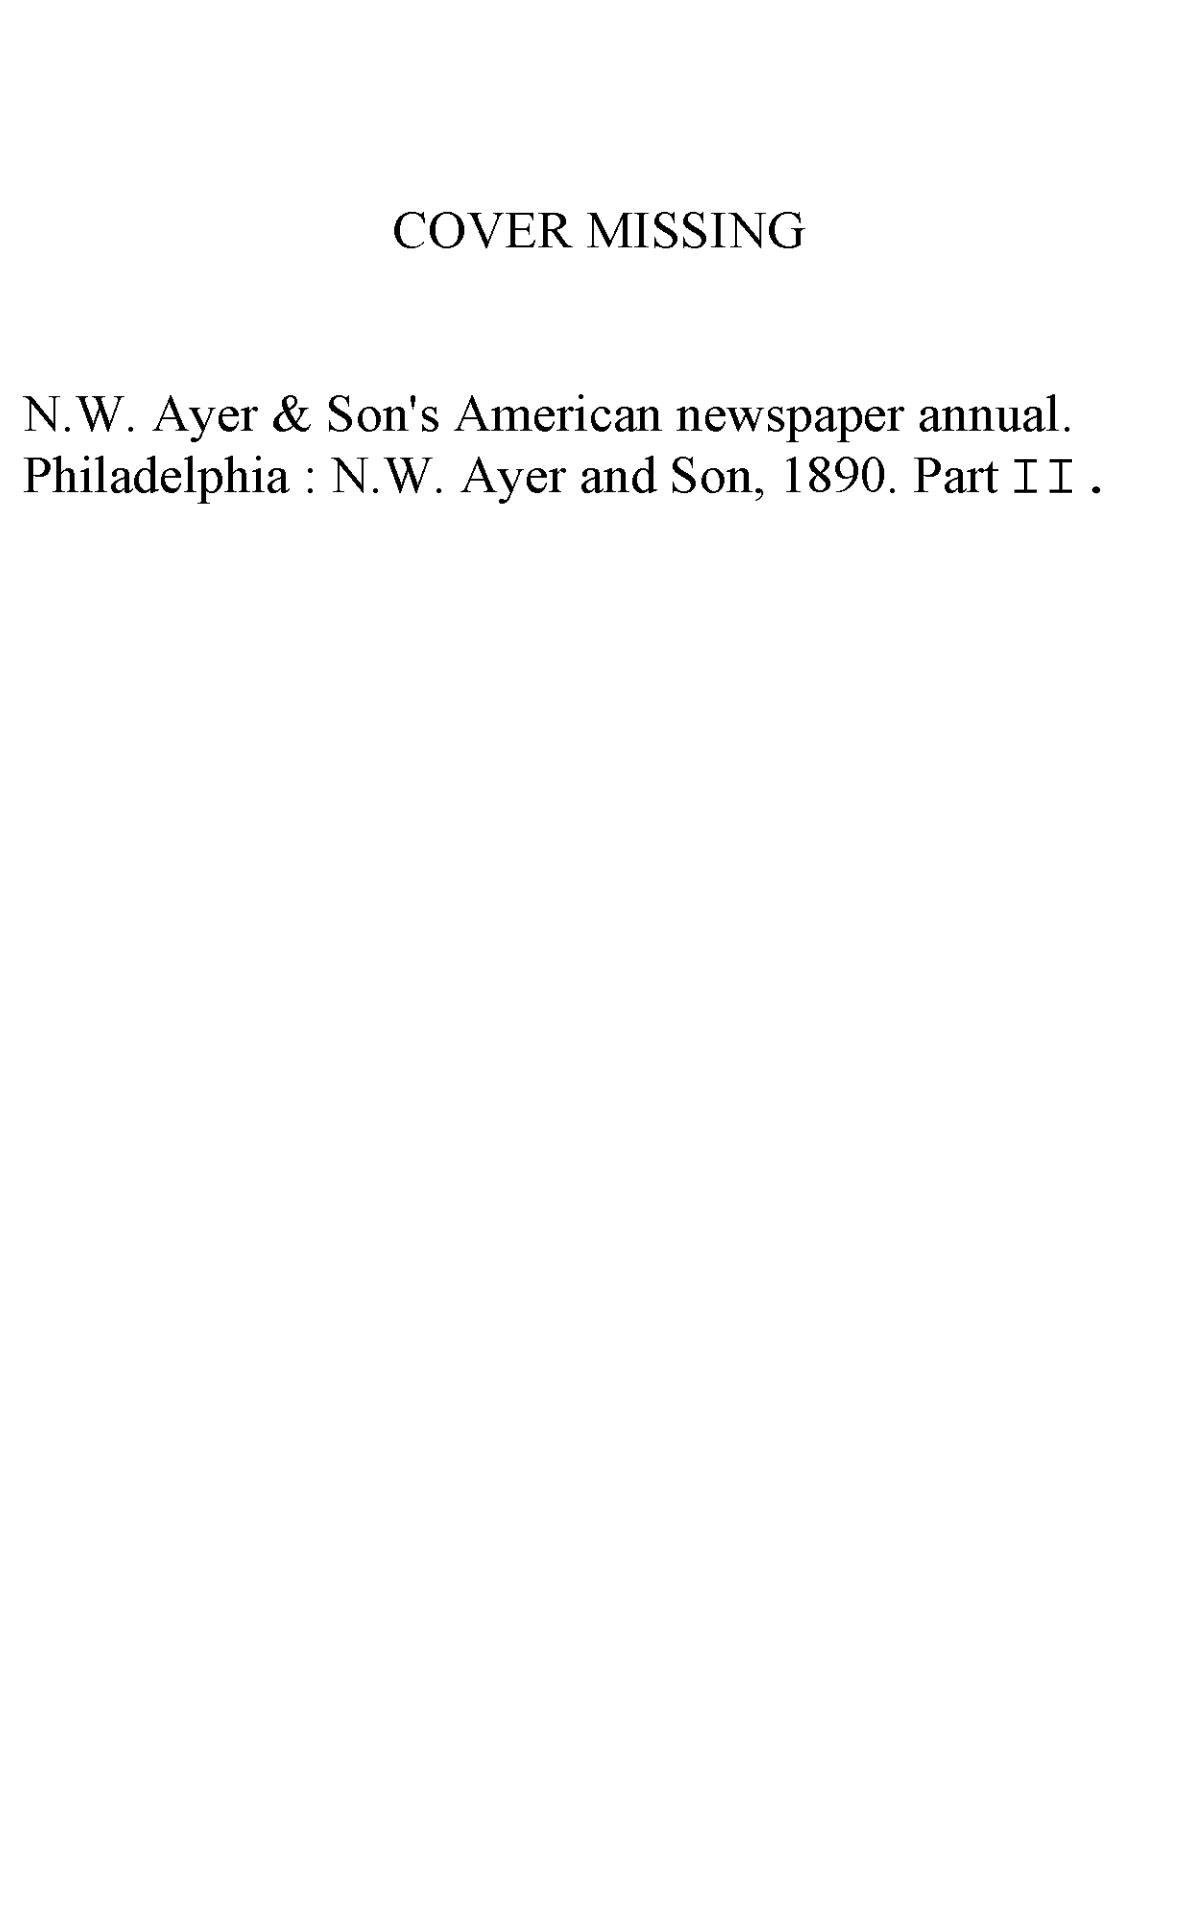 N. W. Ayer & Son's American Newspaper Annual: containing a Catalogue of American Newspapers, a List of All Newspapers of the United States and Canada, 1890, Volume 2
                                                
                                                    None
                                                